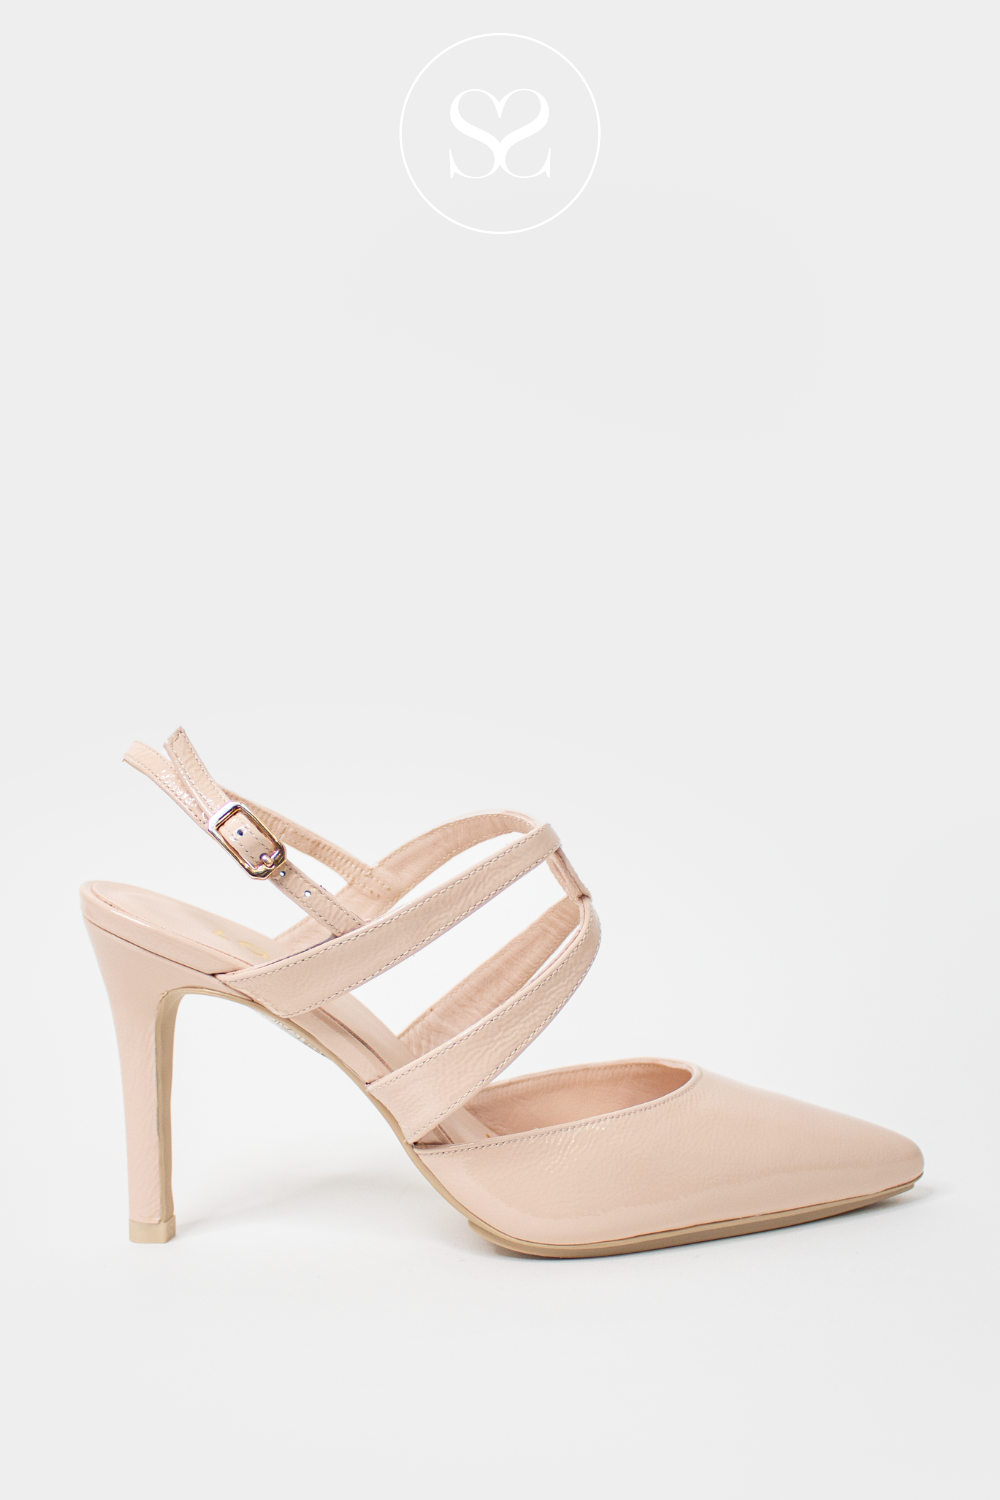 LODI RIANES NUDE PATENT POINTED TOE SLINGBACK WITH ADJUSTABLE STRAP AND CRISS CROSS STRAP DETAIL ACROSS FOOT